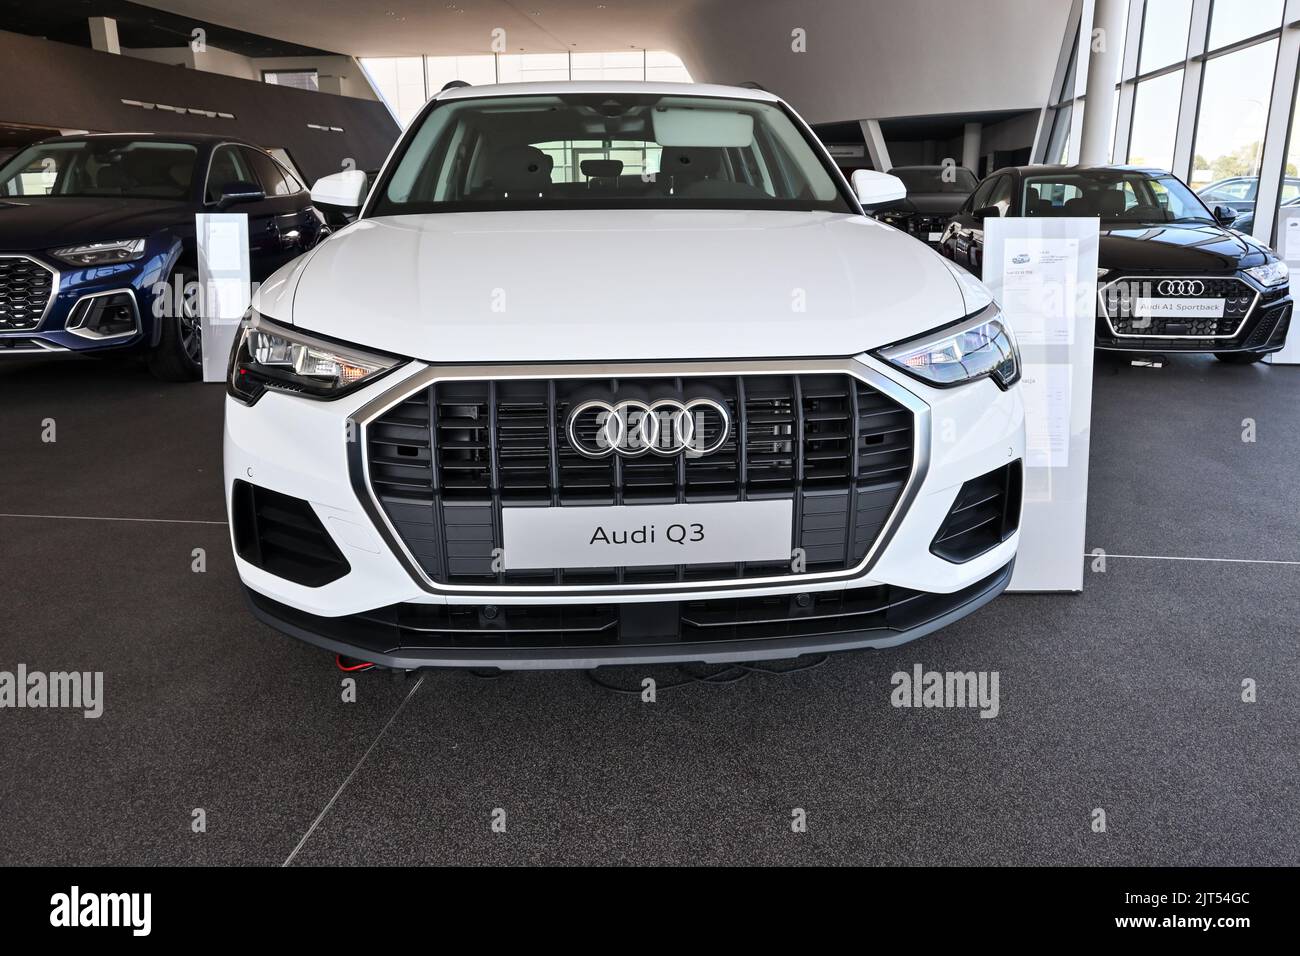 Gdansk, Poland - August 27, 2022: New model of Audi Q3 presented in the car showroom of Gdansk Stock Photo